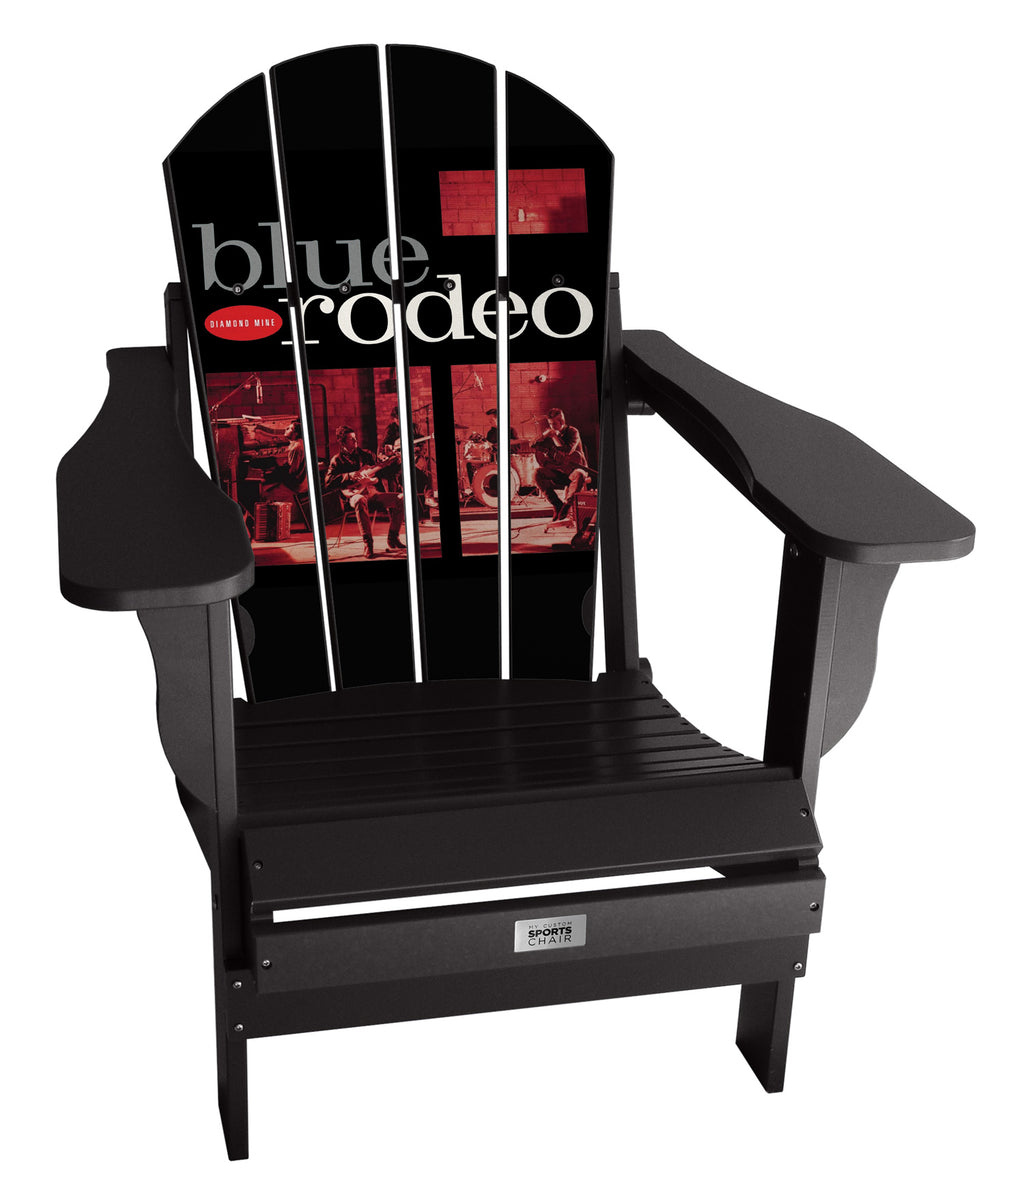 Diamond Mine Officially Licensed Blue Rodeo Chair